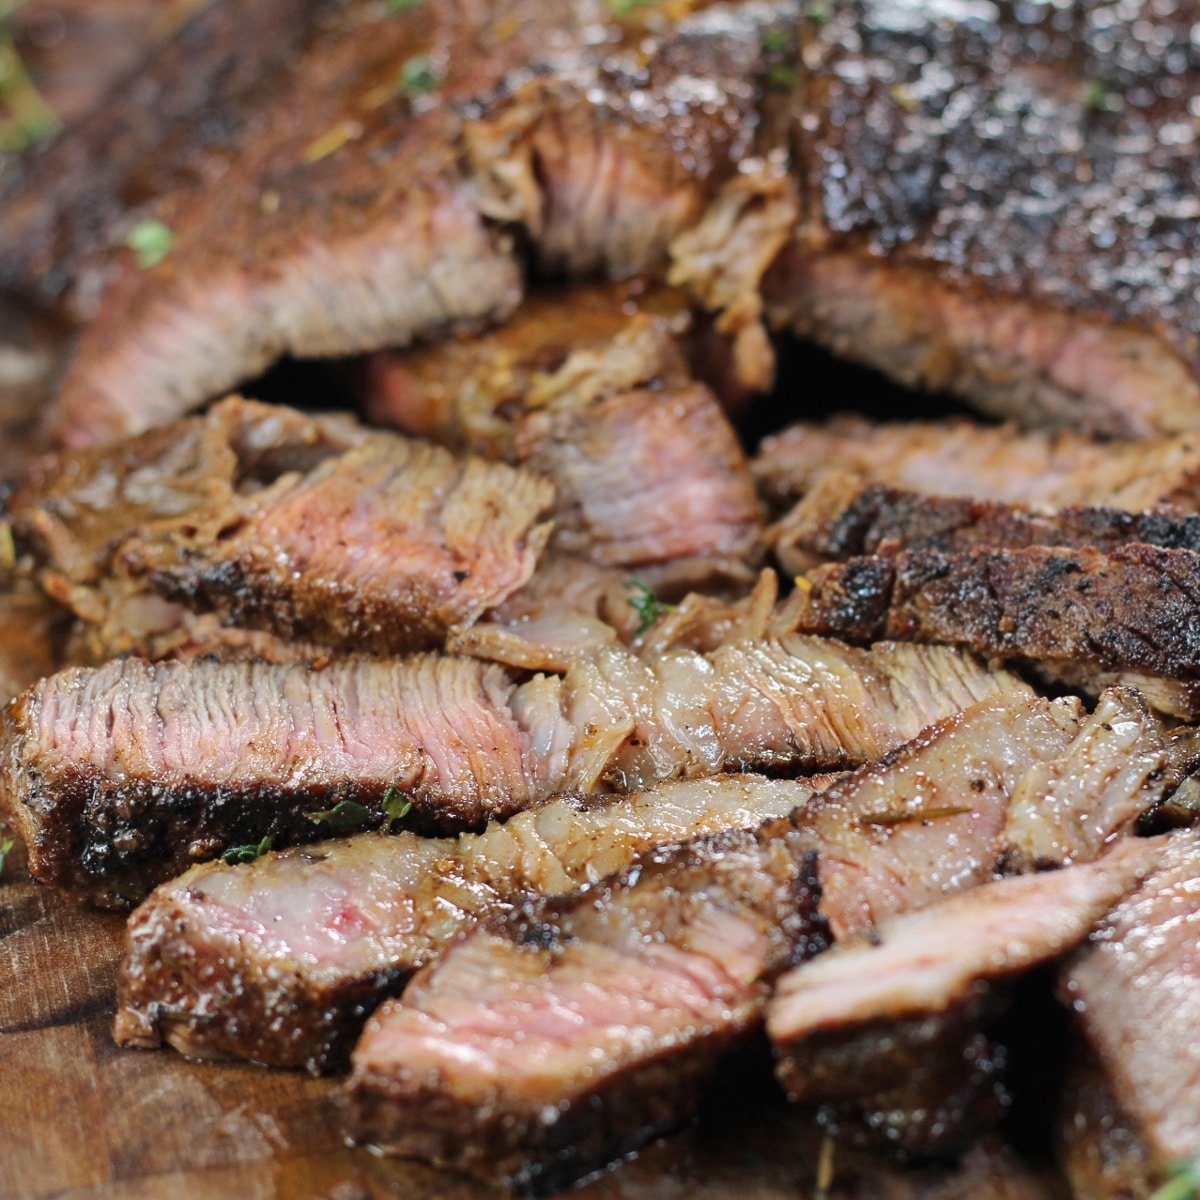 Tender, tasty chuck steaks can be seared to steakhouse-quality perfection in just minutes!